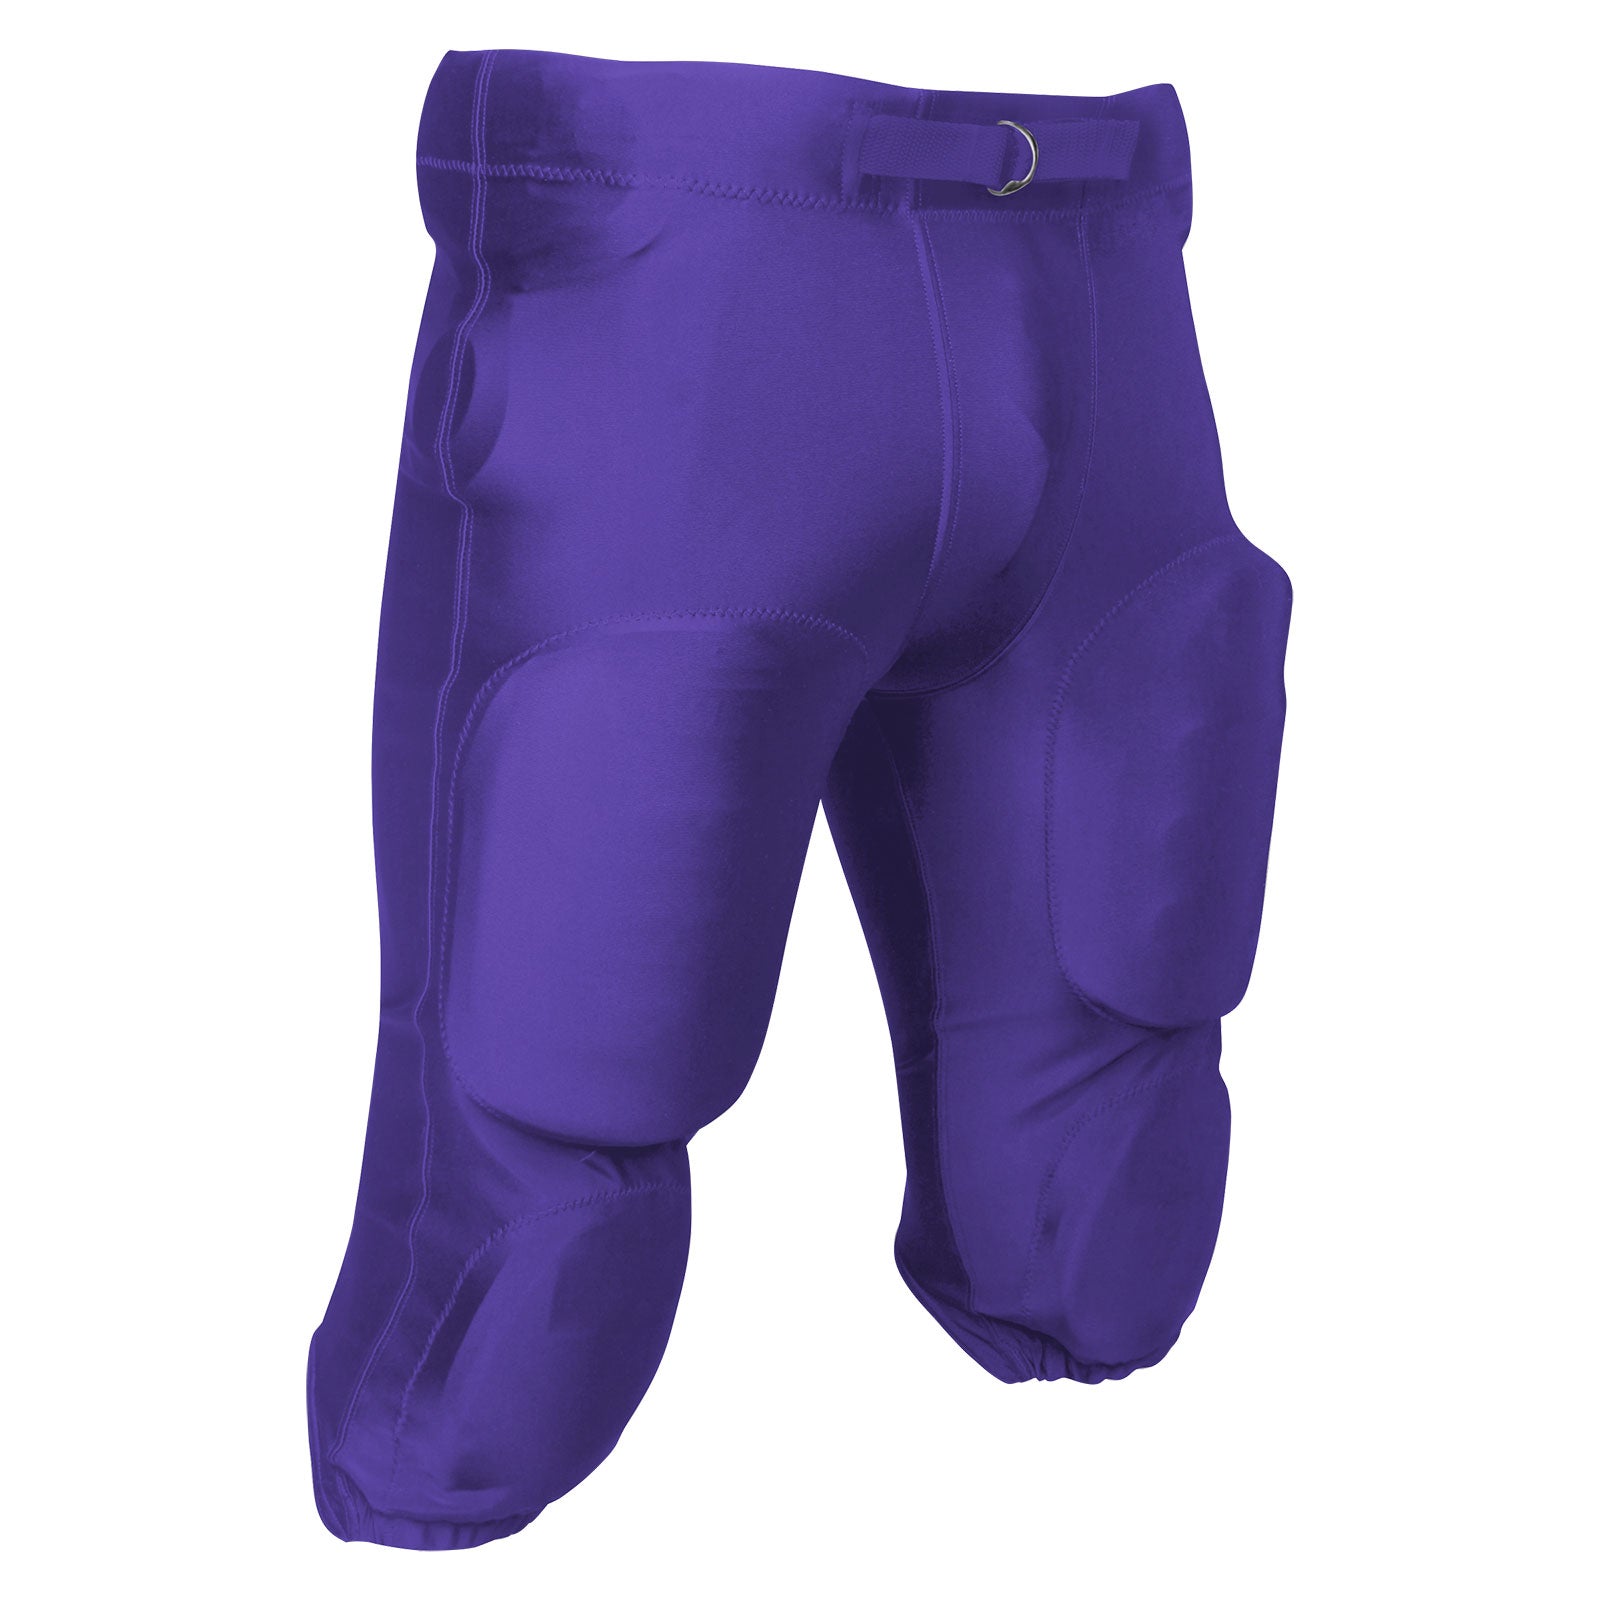 Traditional Football Pant With Pad Pockets PURPLE BODY